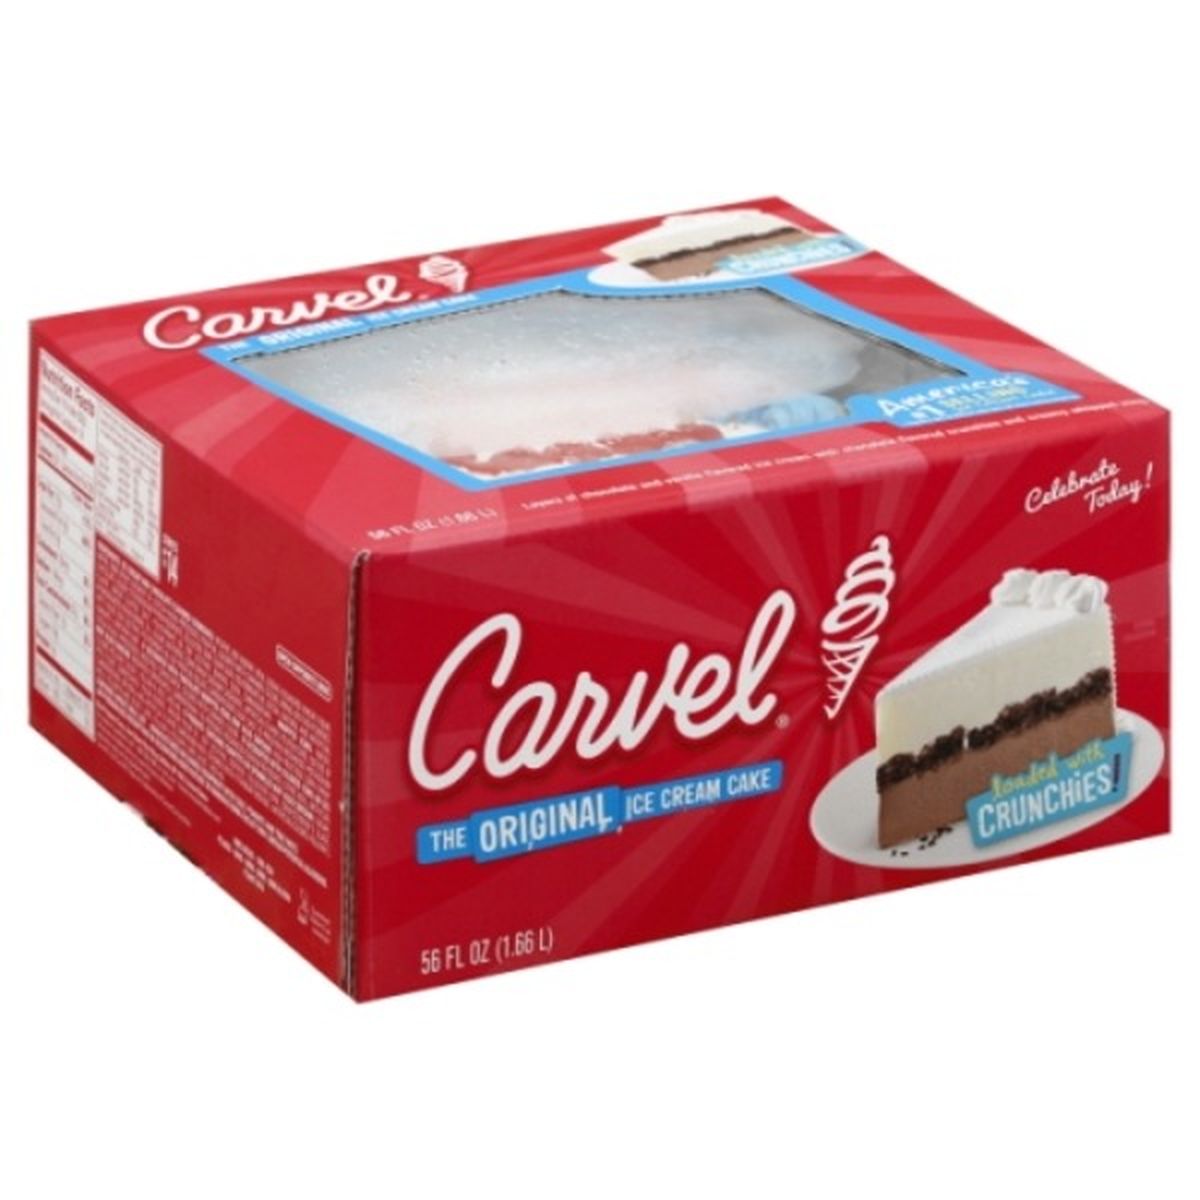 Calories in Carvel Ice Cream Cake, Double Crunch